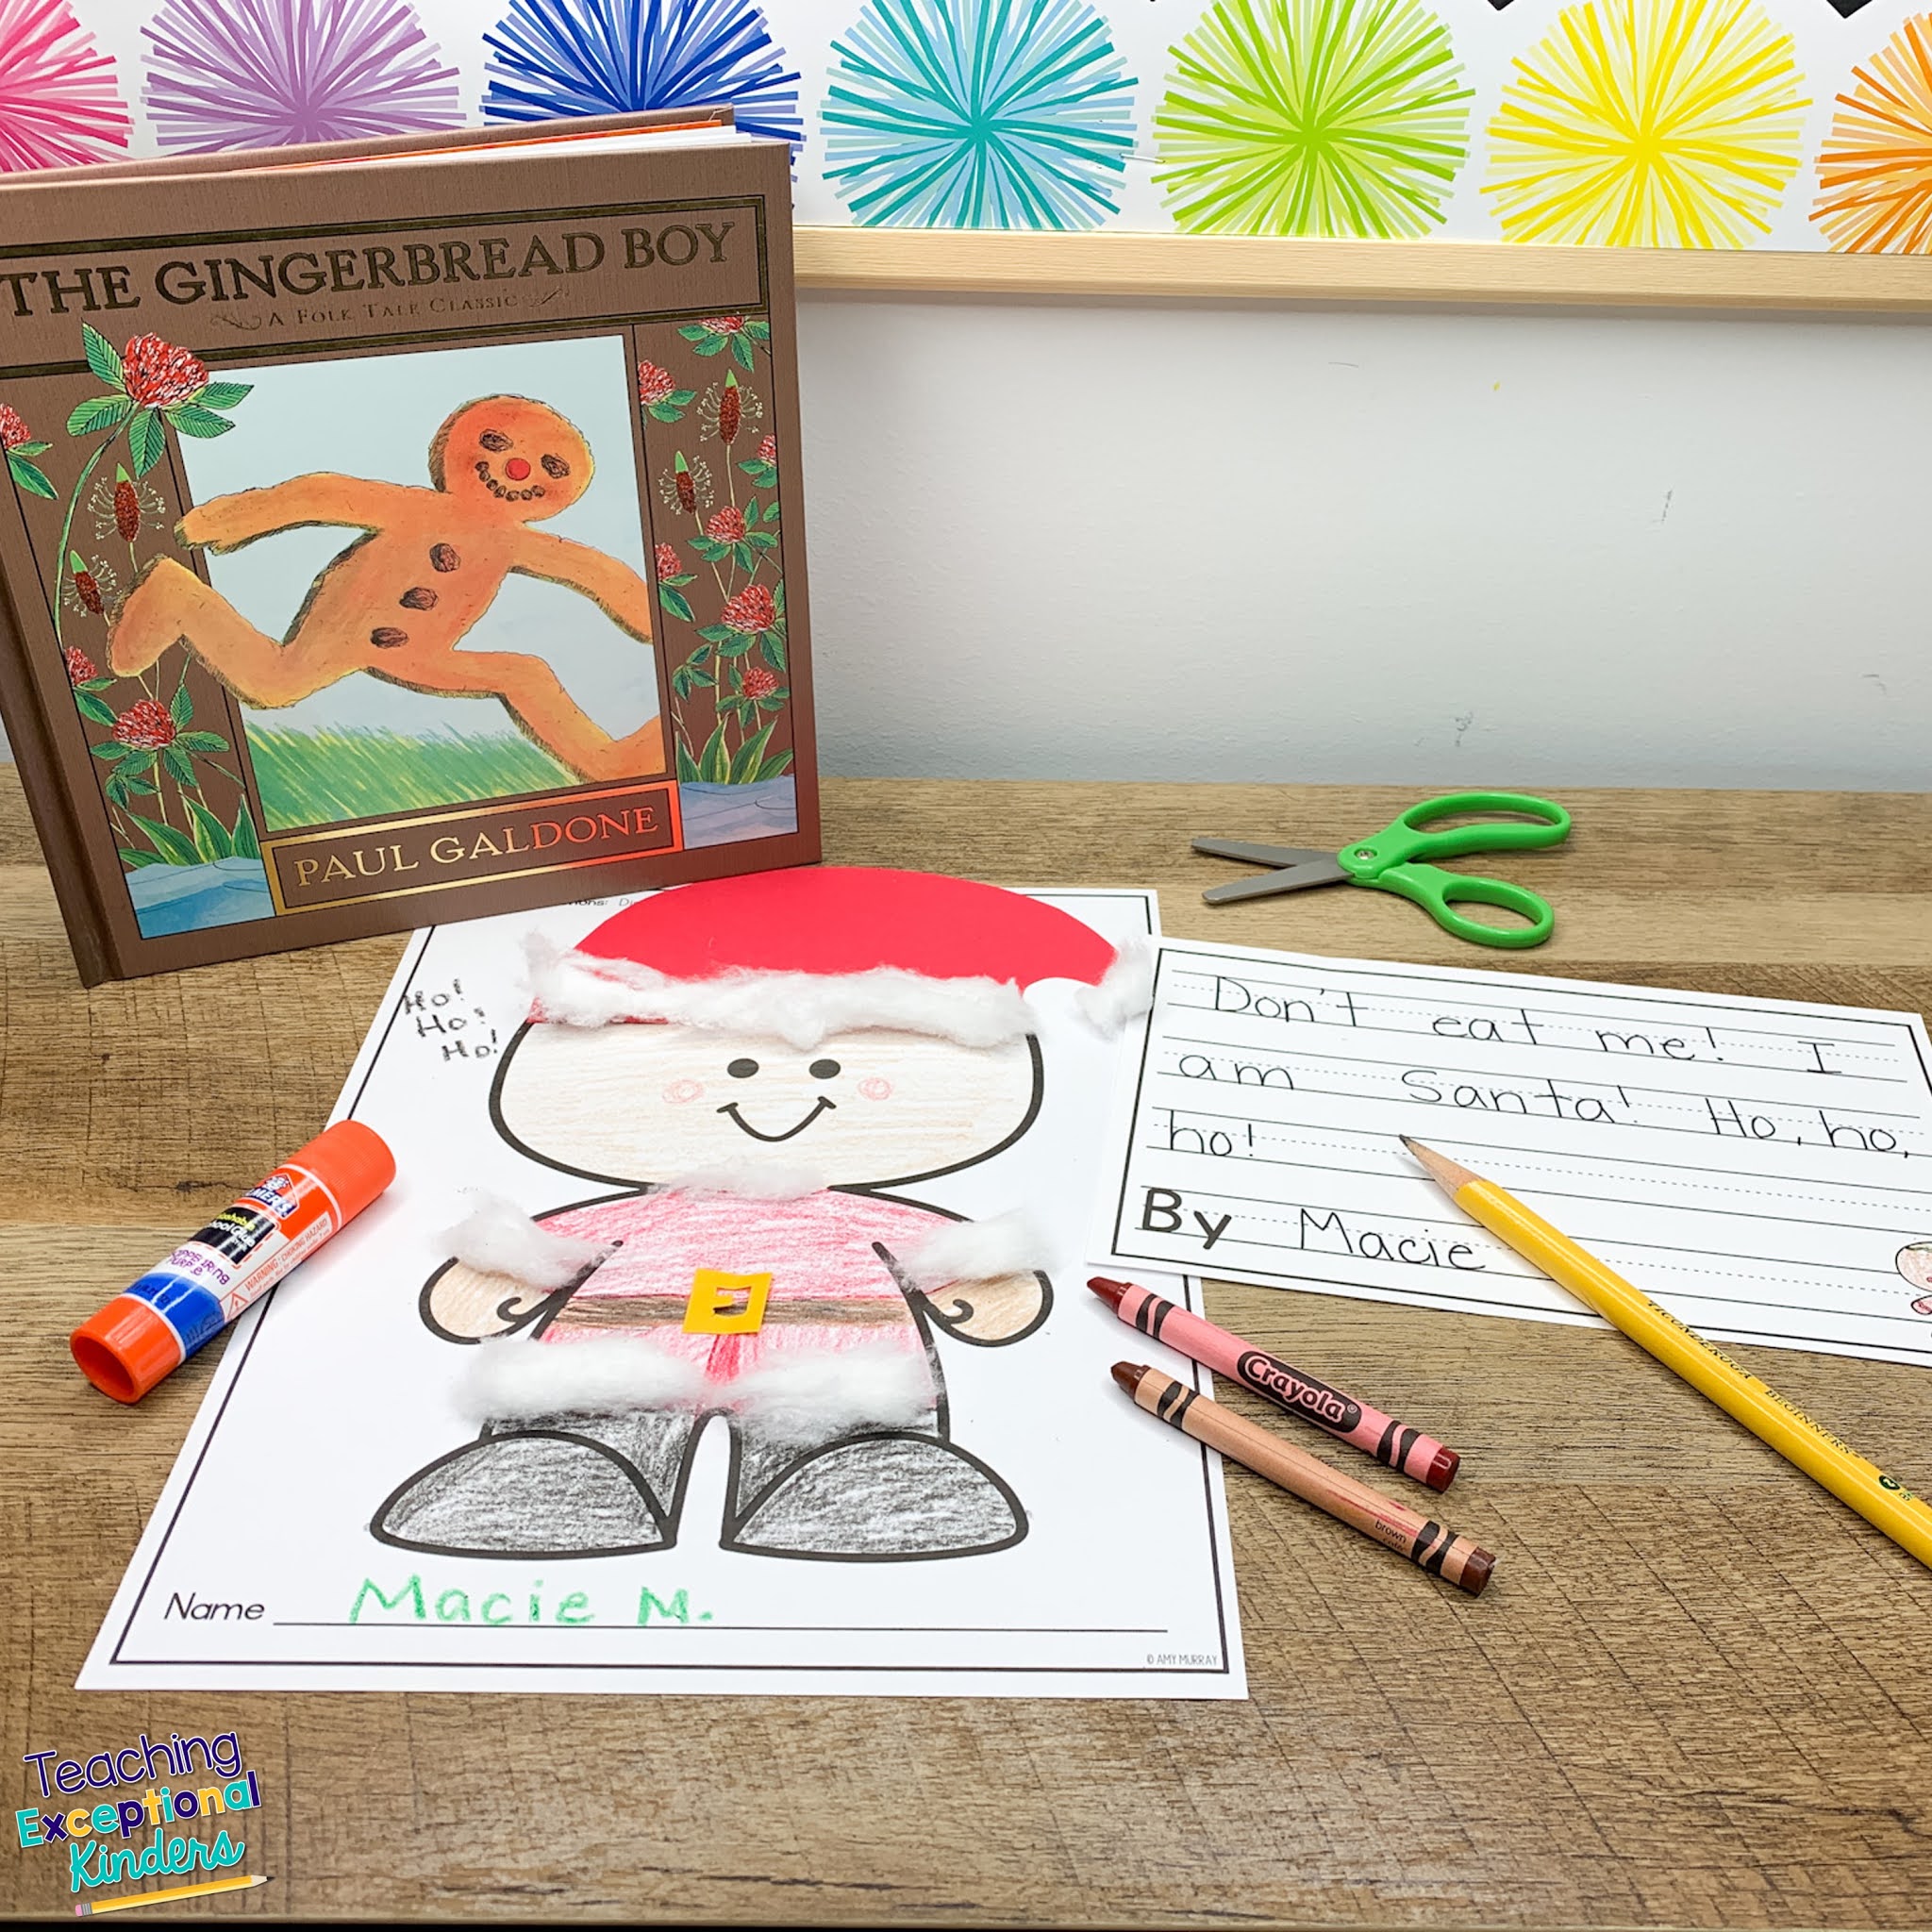 disguise-a-gingerbread-man-project-with-digital-activities-teaching